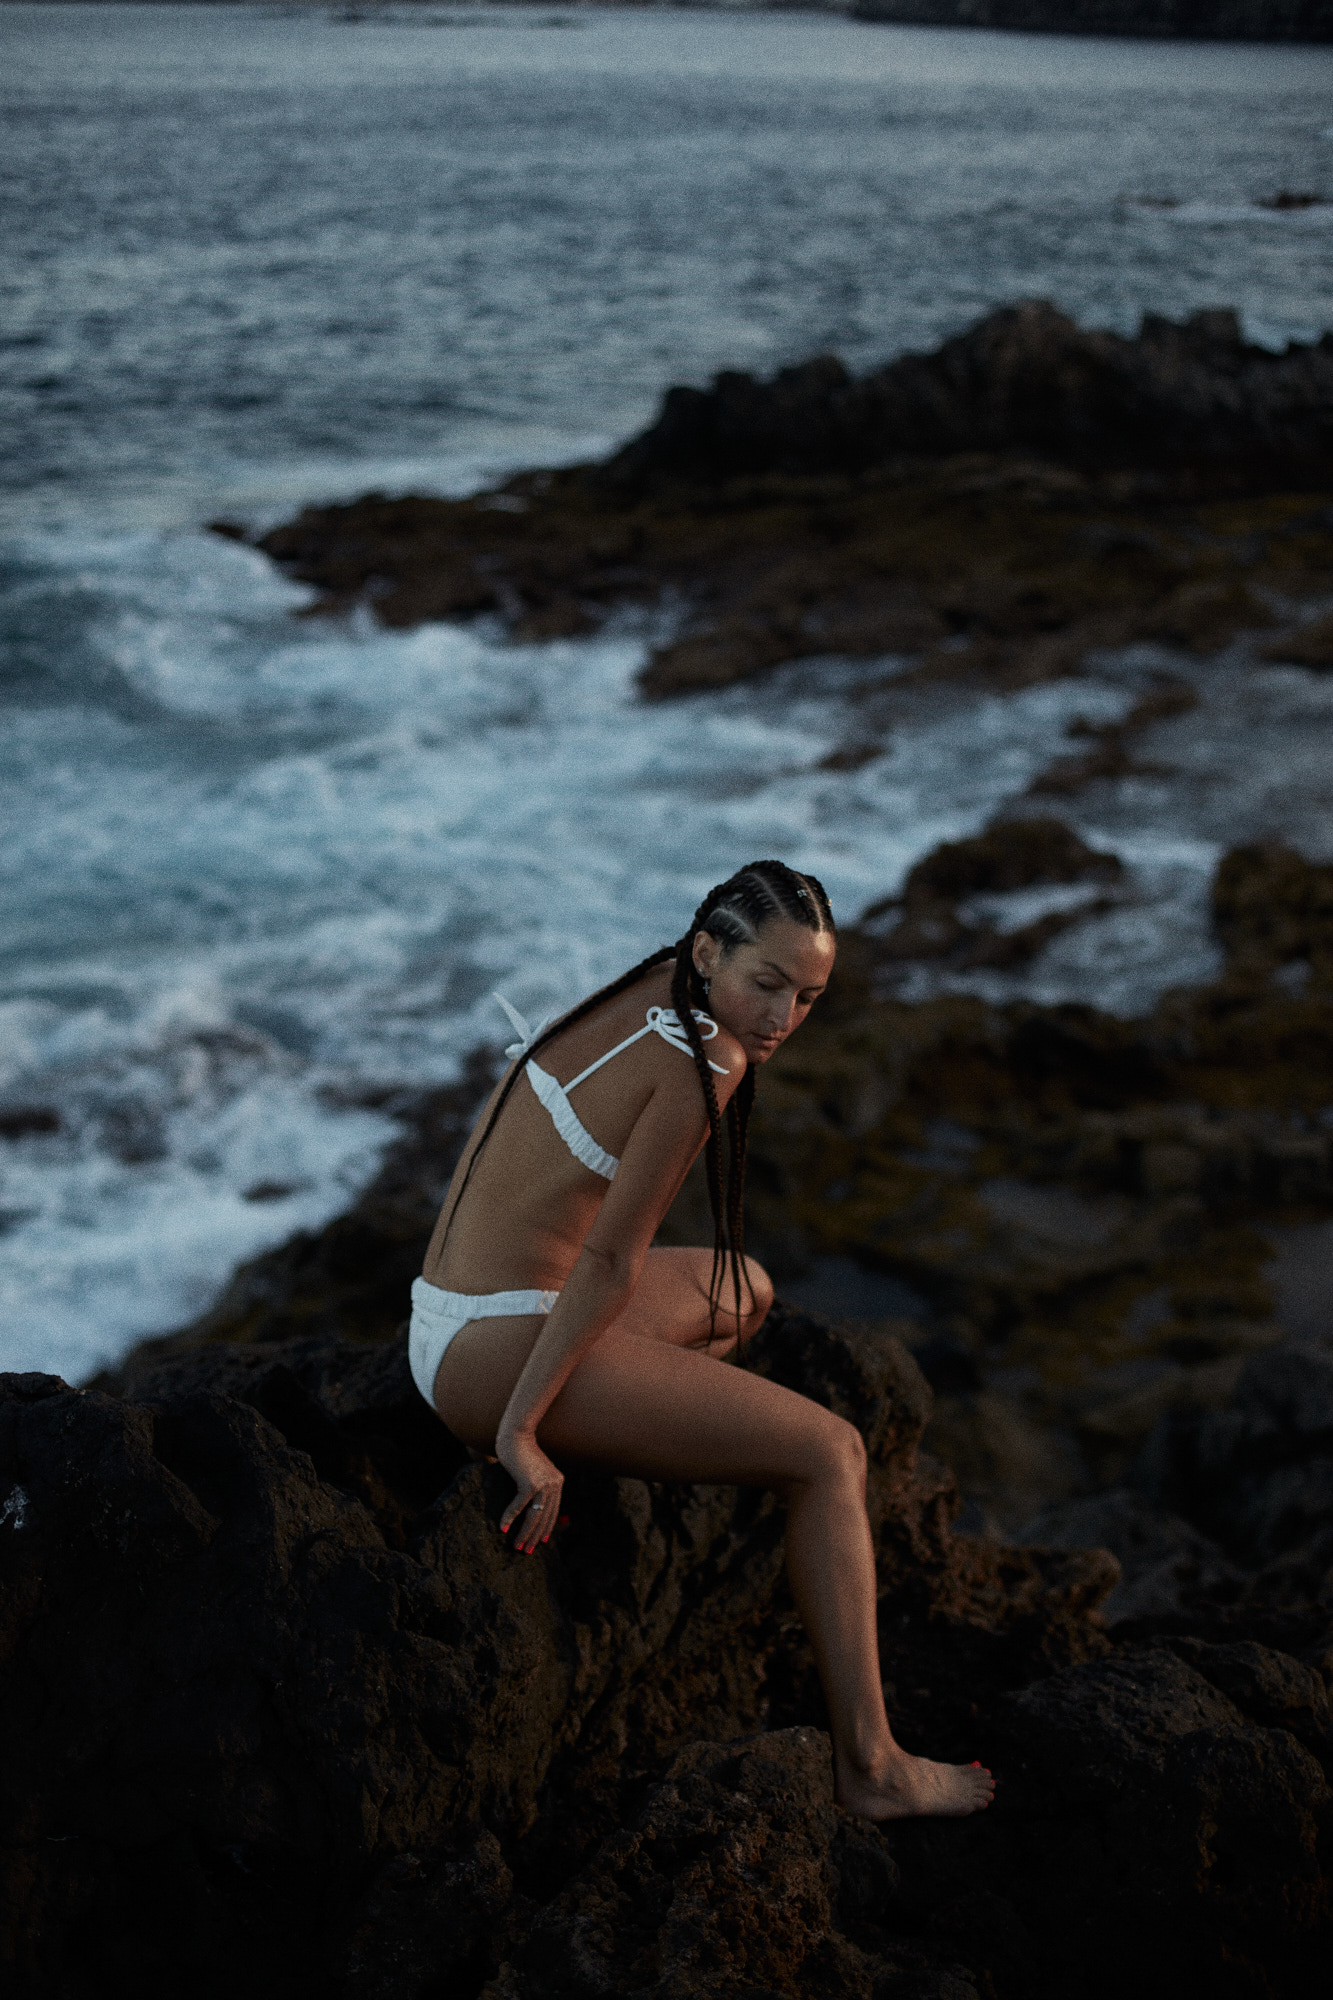 undress swimsuit campaign canary islands photographer